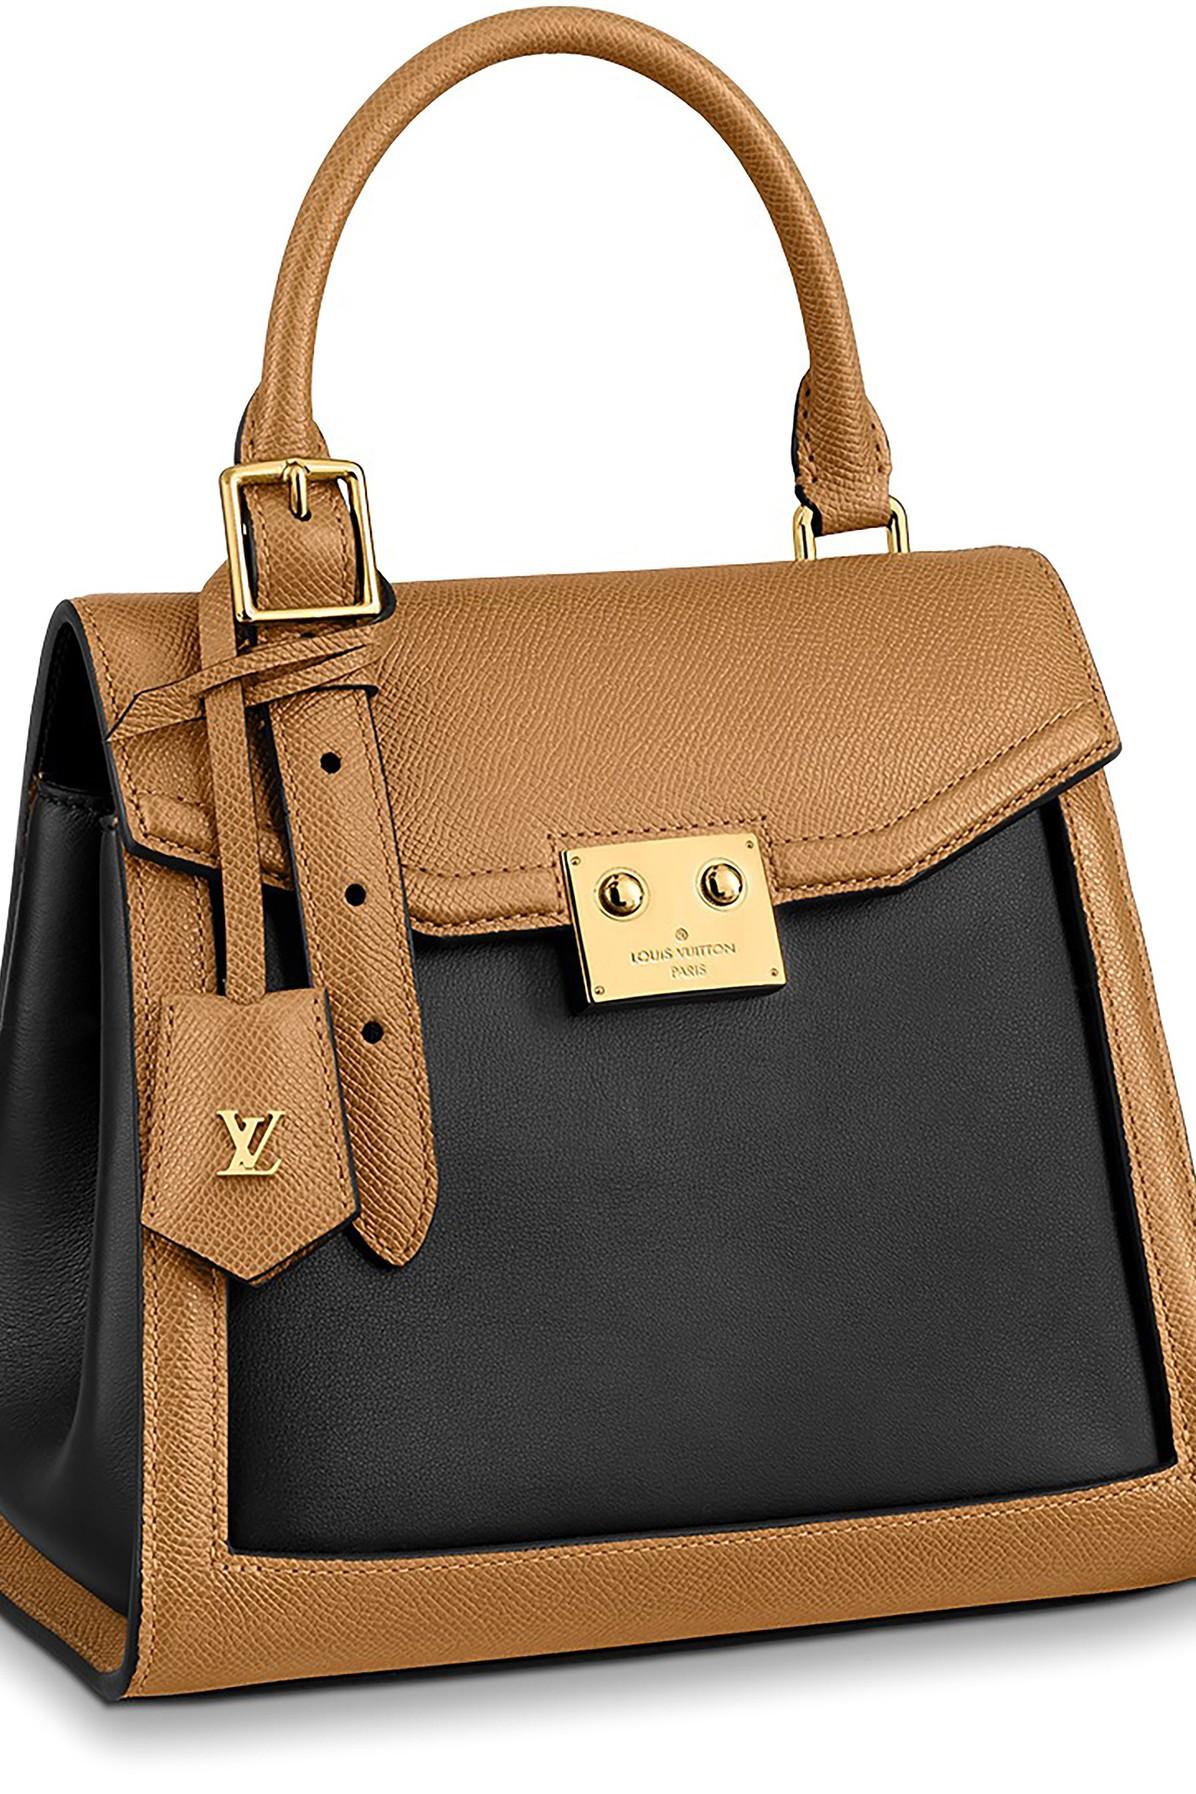 FashionMall.Online - Louis Vuitton LV The Arch Bag Visit our site